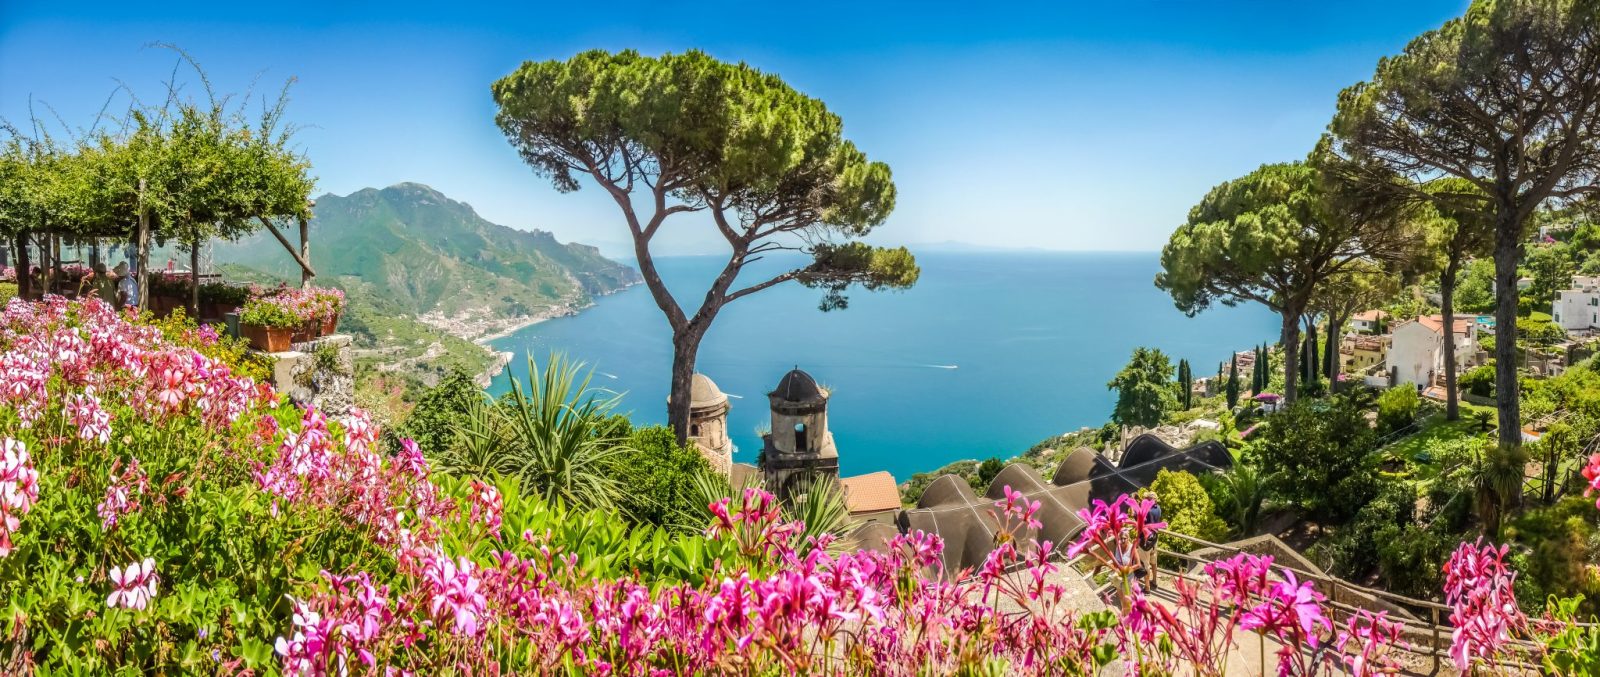 Scenic,Picture-postcard,View,Of,Famous,Amalfi,Coast,With,Gulf,Of